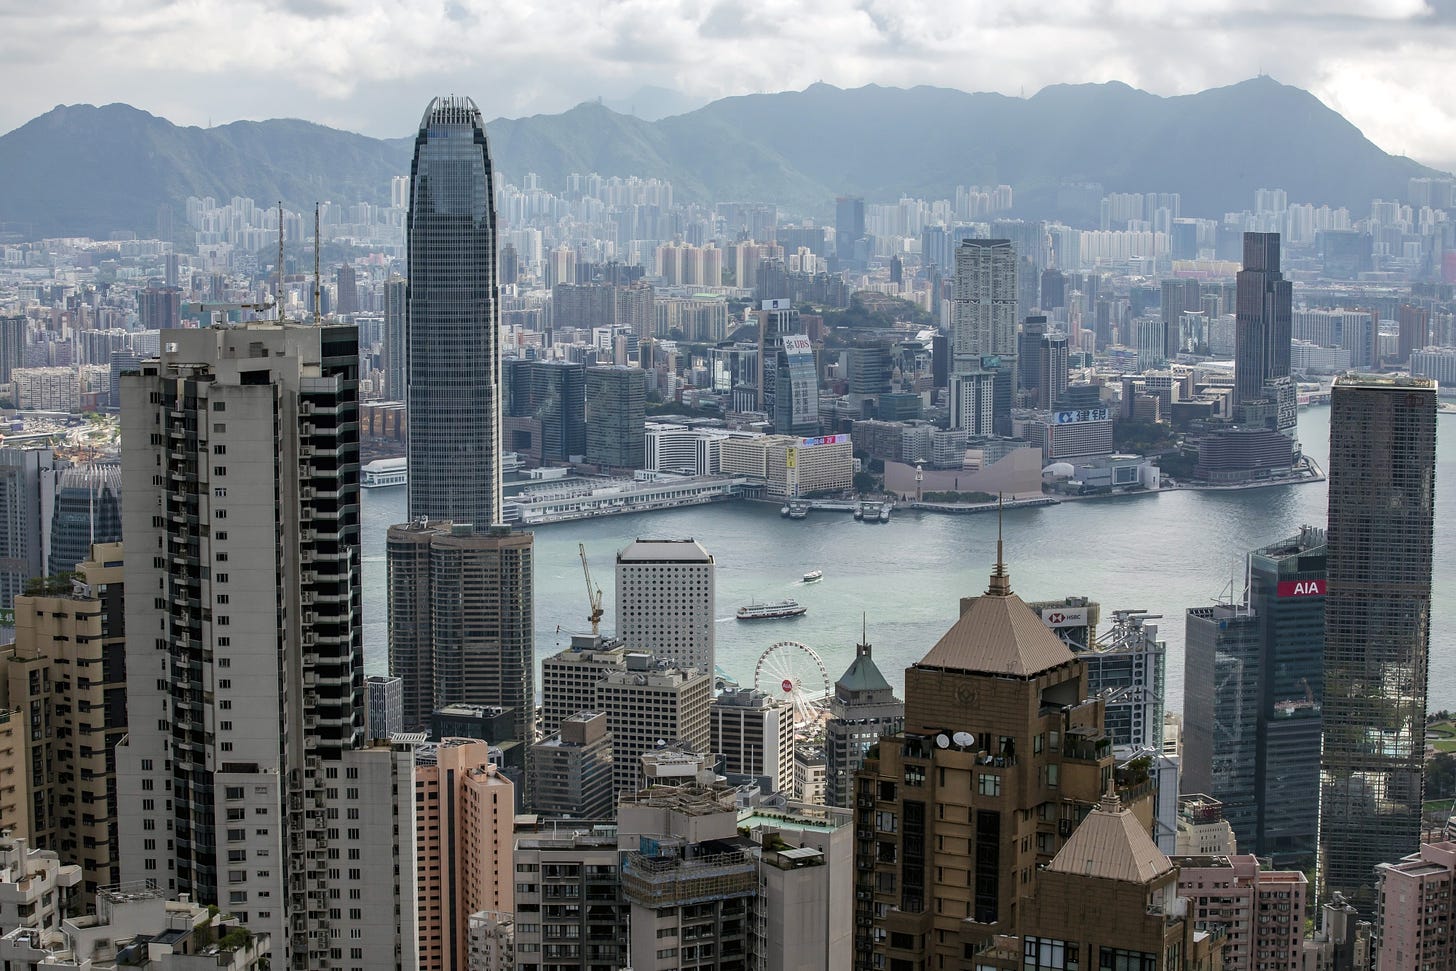 Hong Kong, which is also pushing to burnish its image as a&nbsp;fintech hub, is the latest place to experiment with central bank digital currencies in response to rise of Bitcoin and other cryptocurrencies.&nbsp;